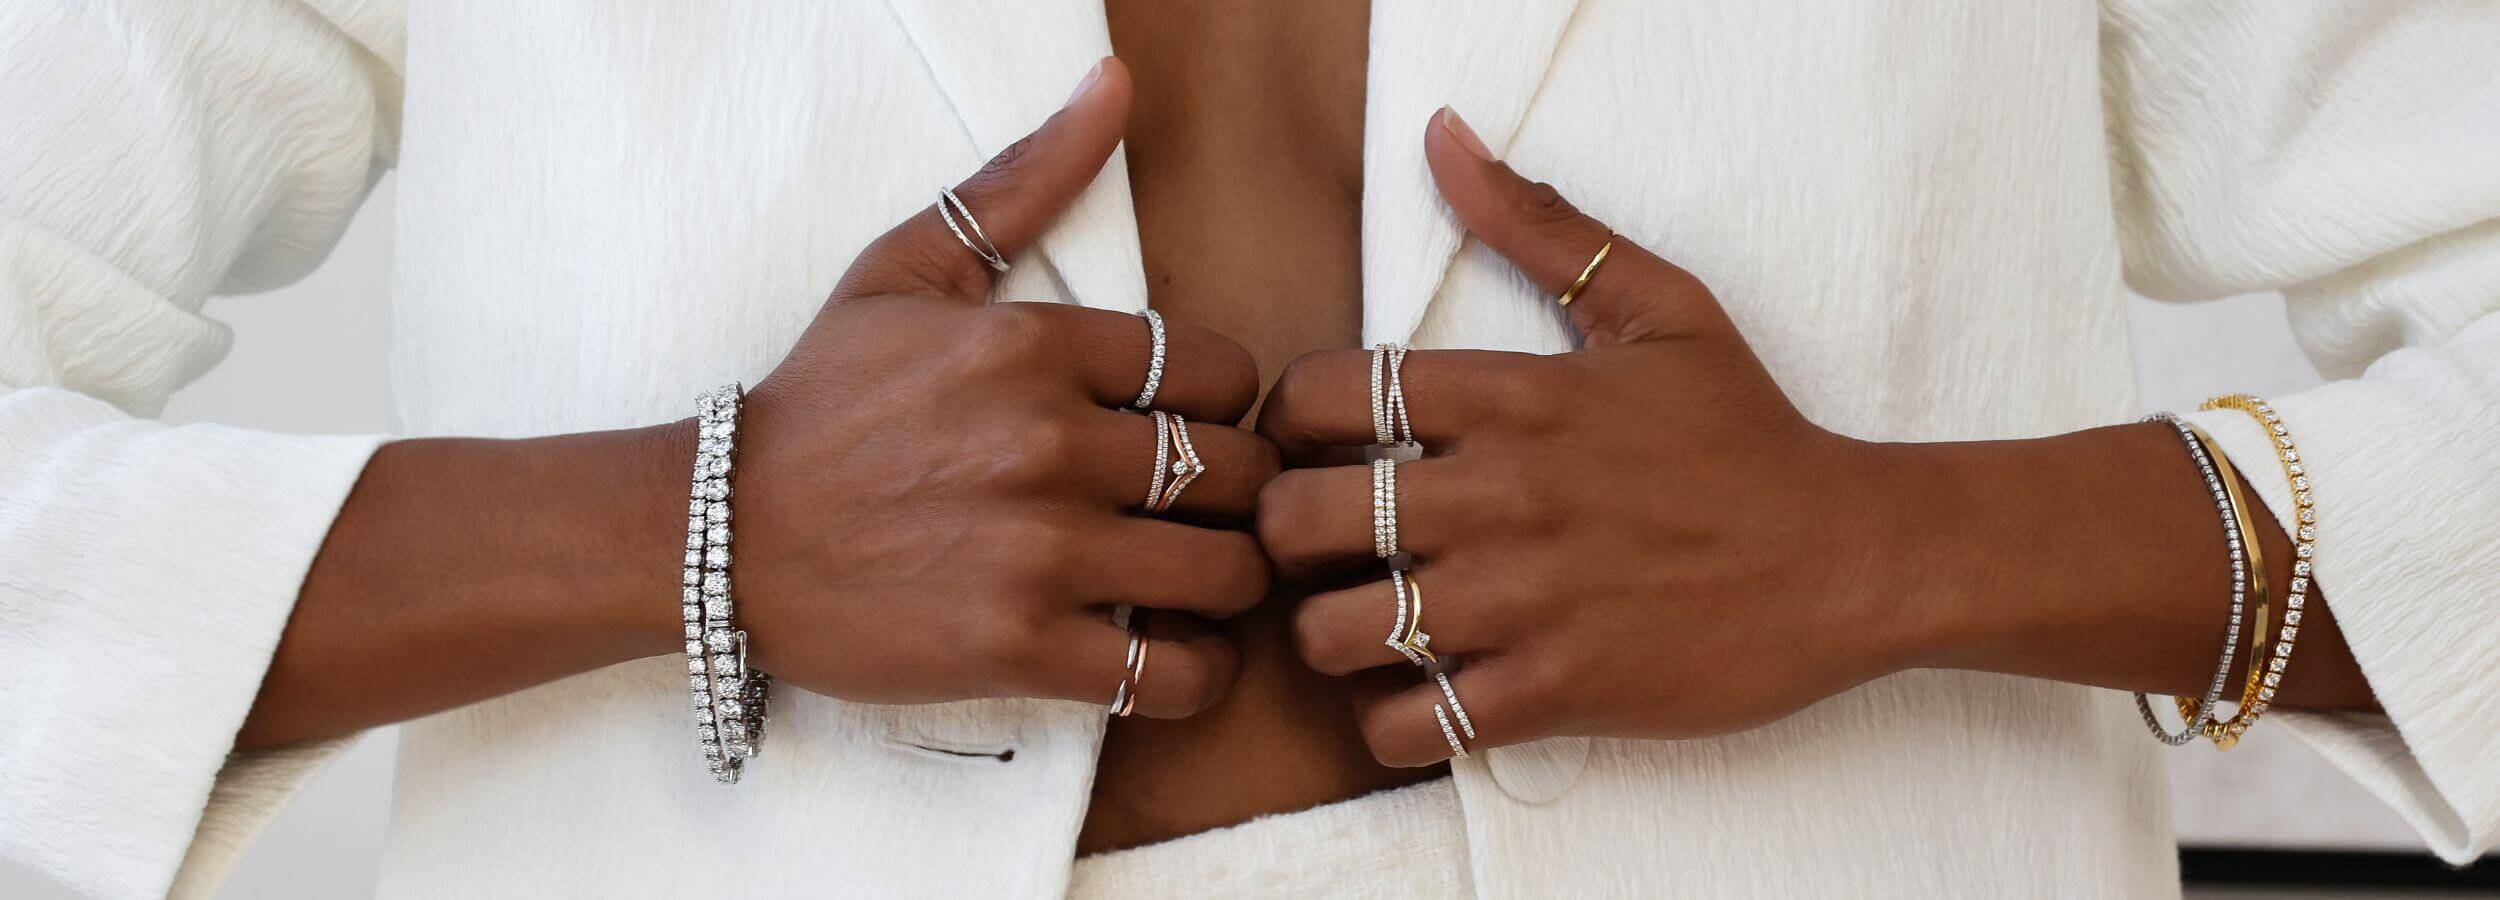 stacking rings on hands